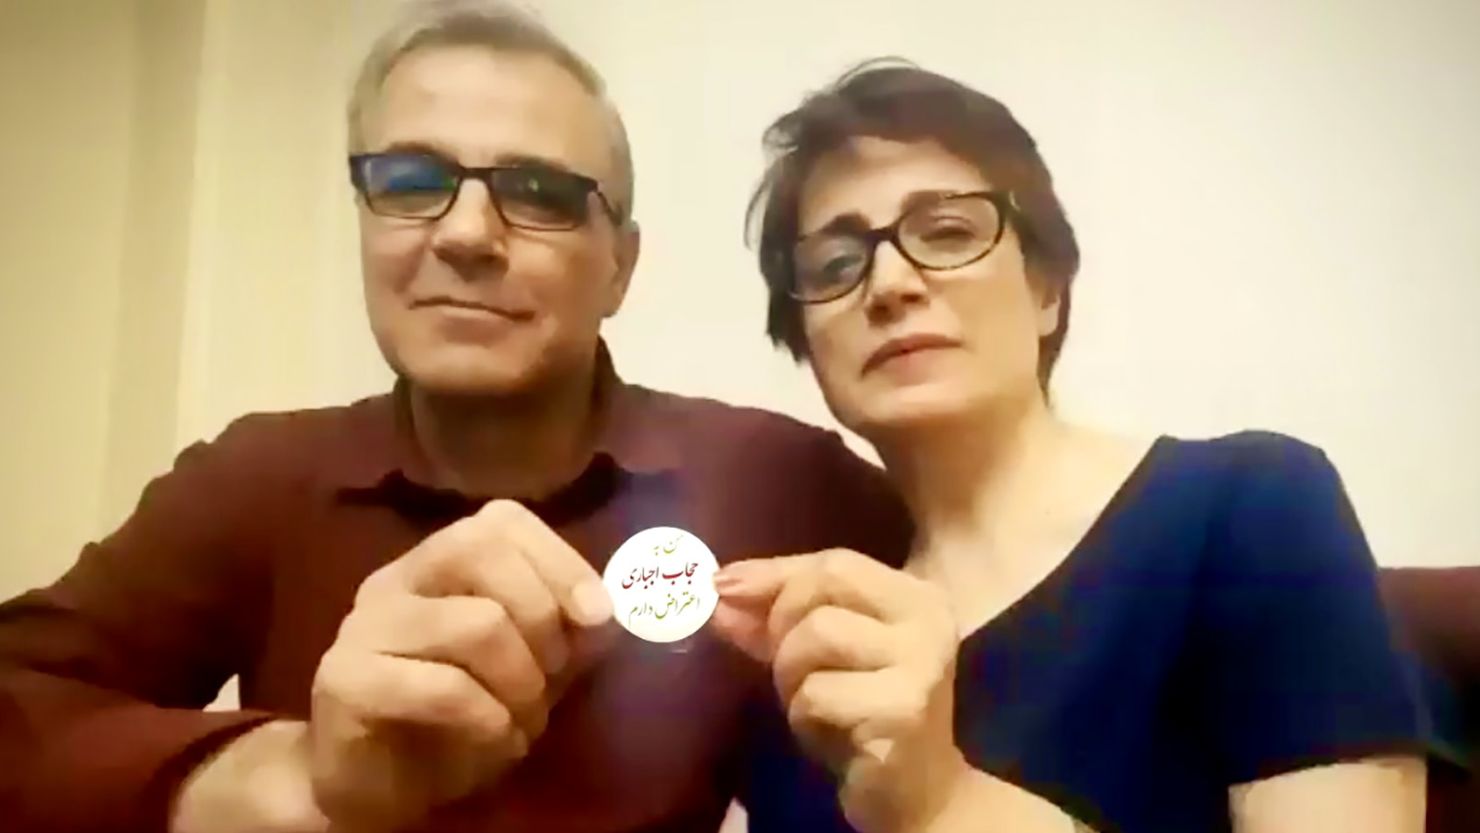 Iranian human rights lawyer Nasrin Sotoudeh and husband Reza Khandan hold up a protest button which reads: 'I Oppose the Mandatory Hijab."